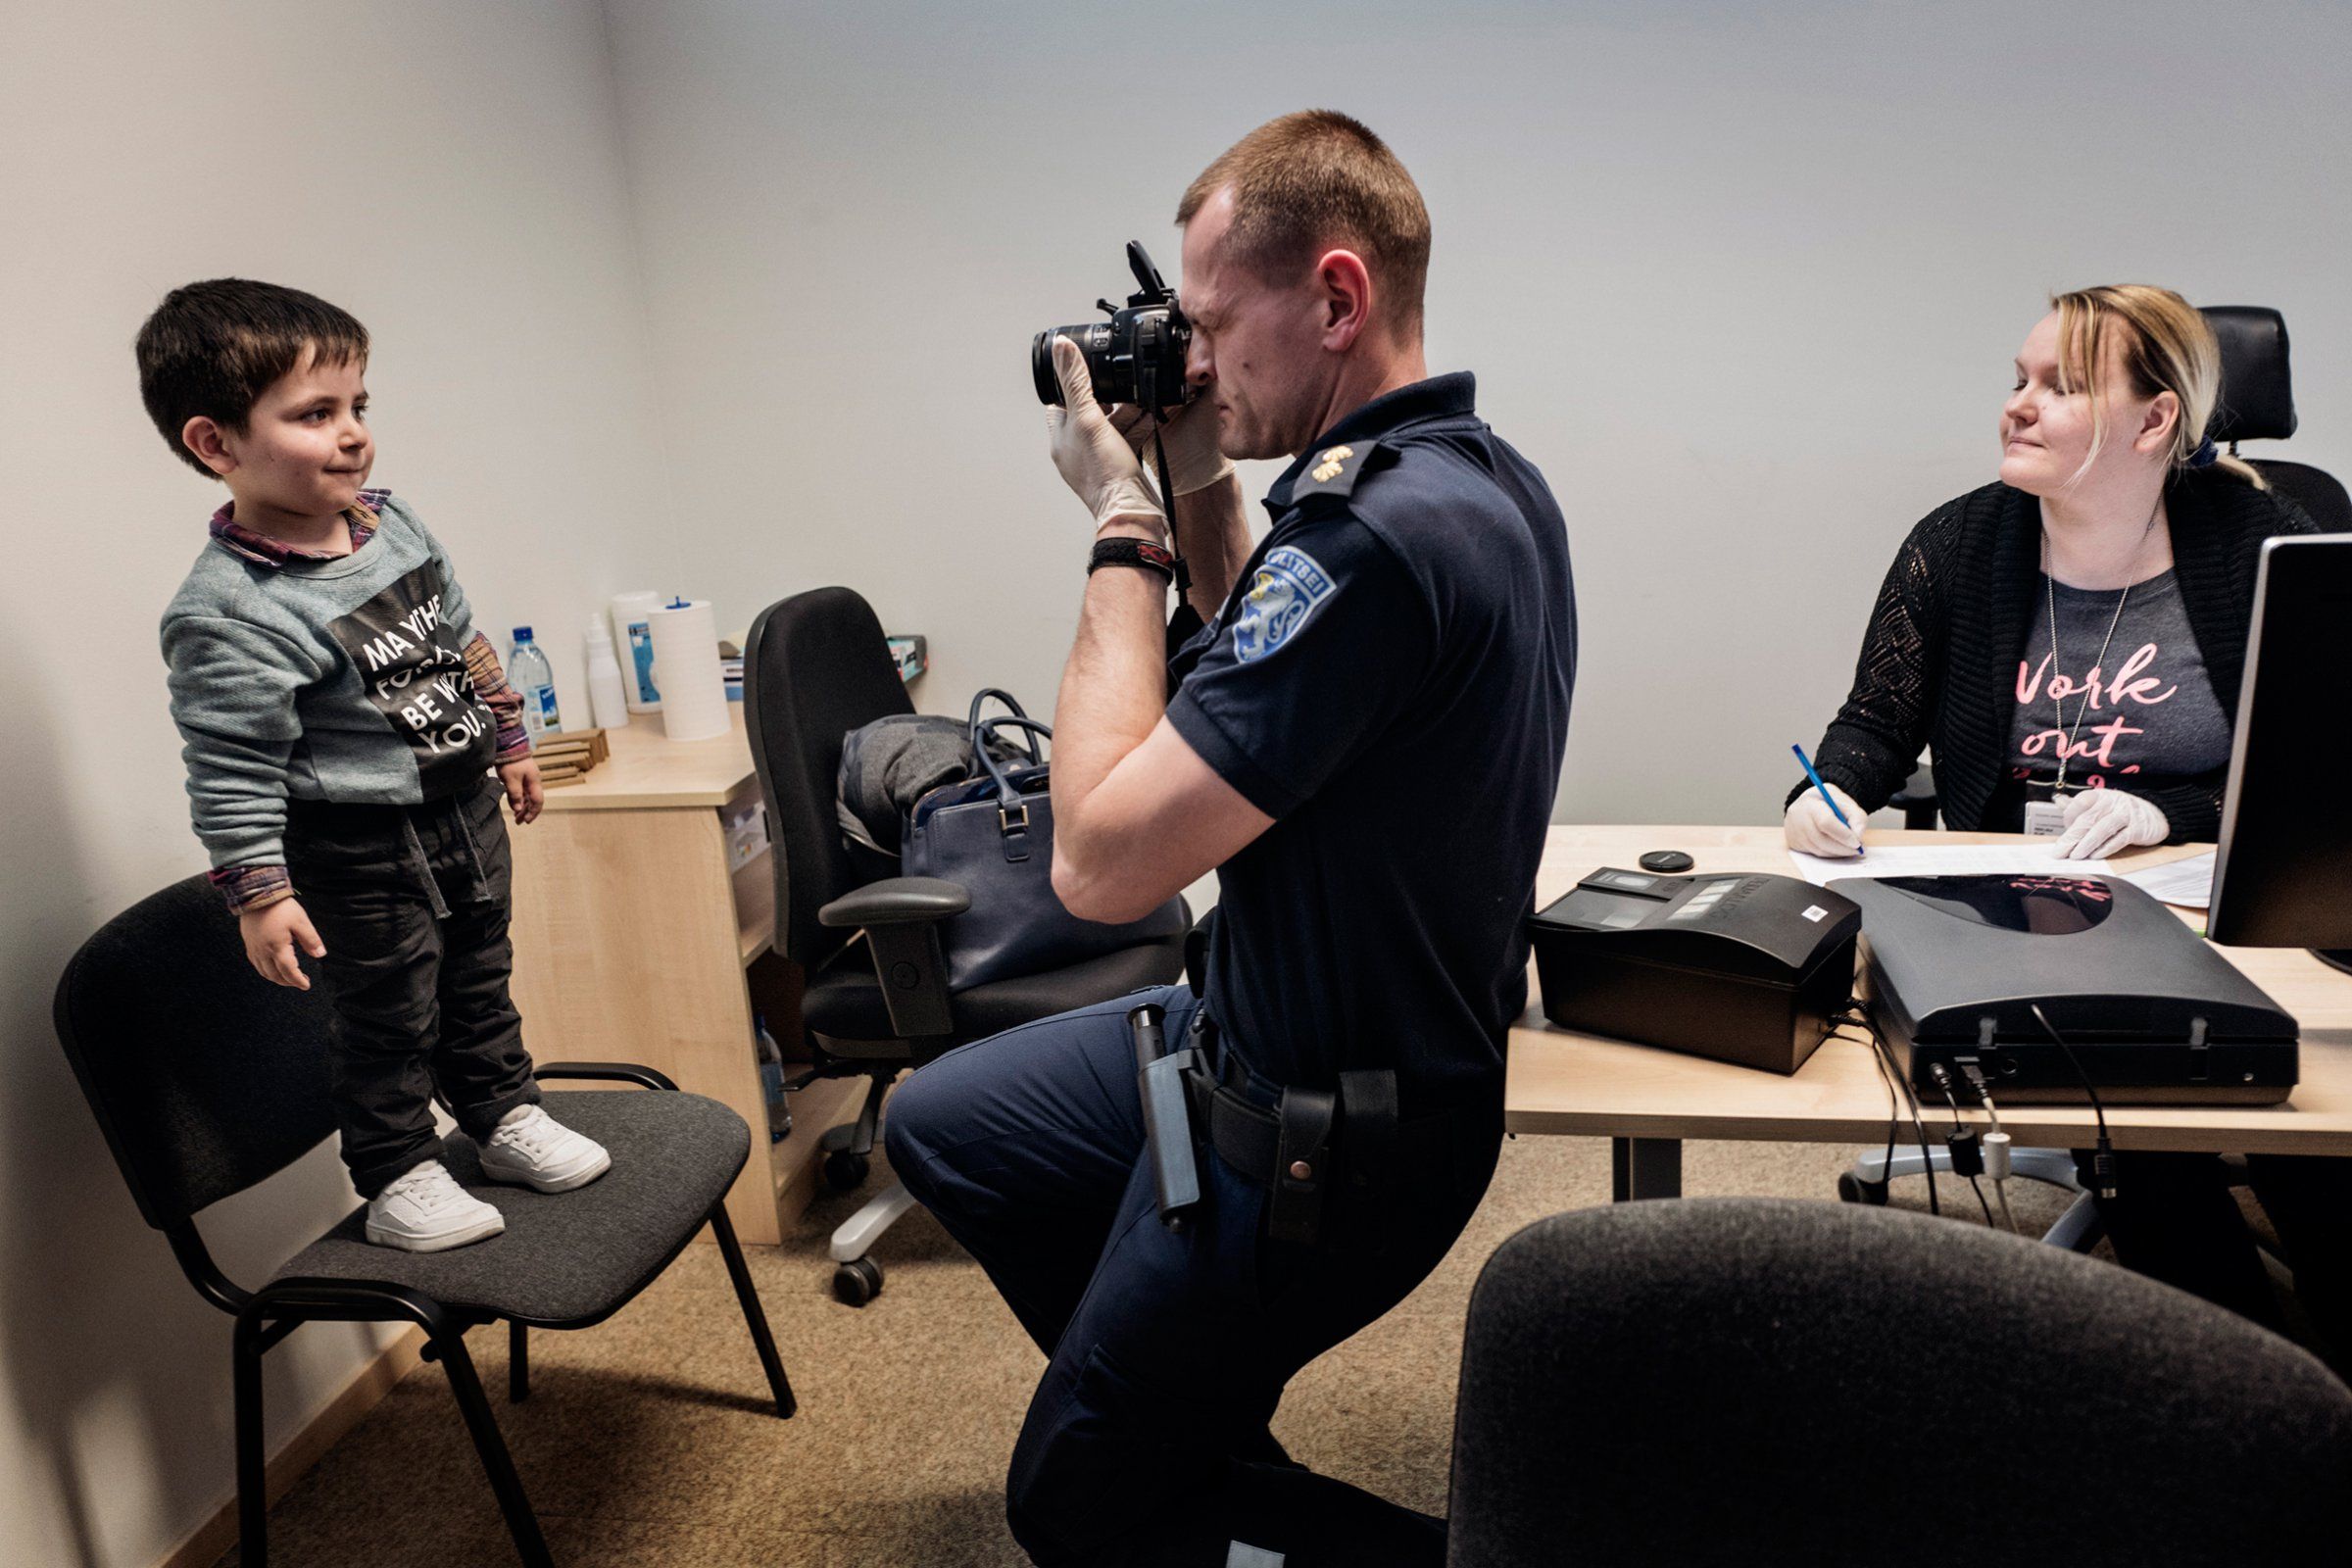 Syrian refugee Wael Abzali is fingerprinted and photographed by Estonian border officials in the airport in Talinn upon arrival in Estonia. Image by Lynsey Addario. Estonia, 2017. 